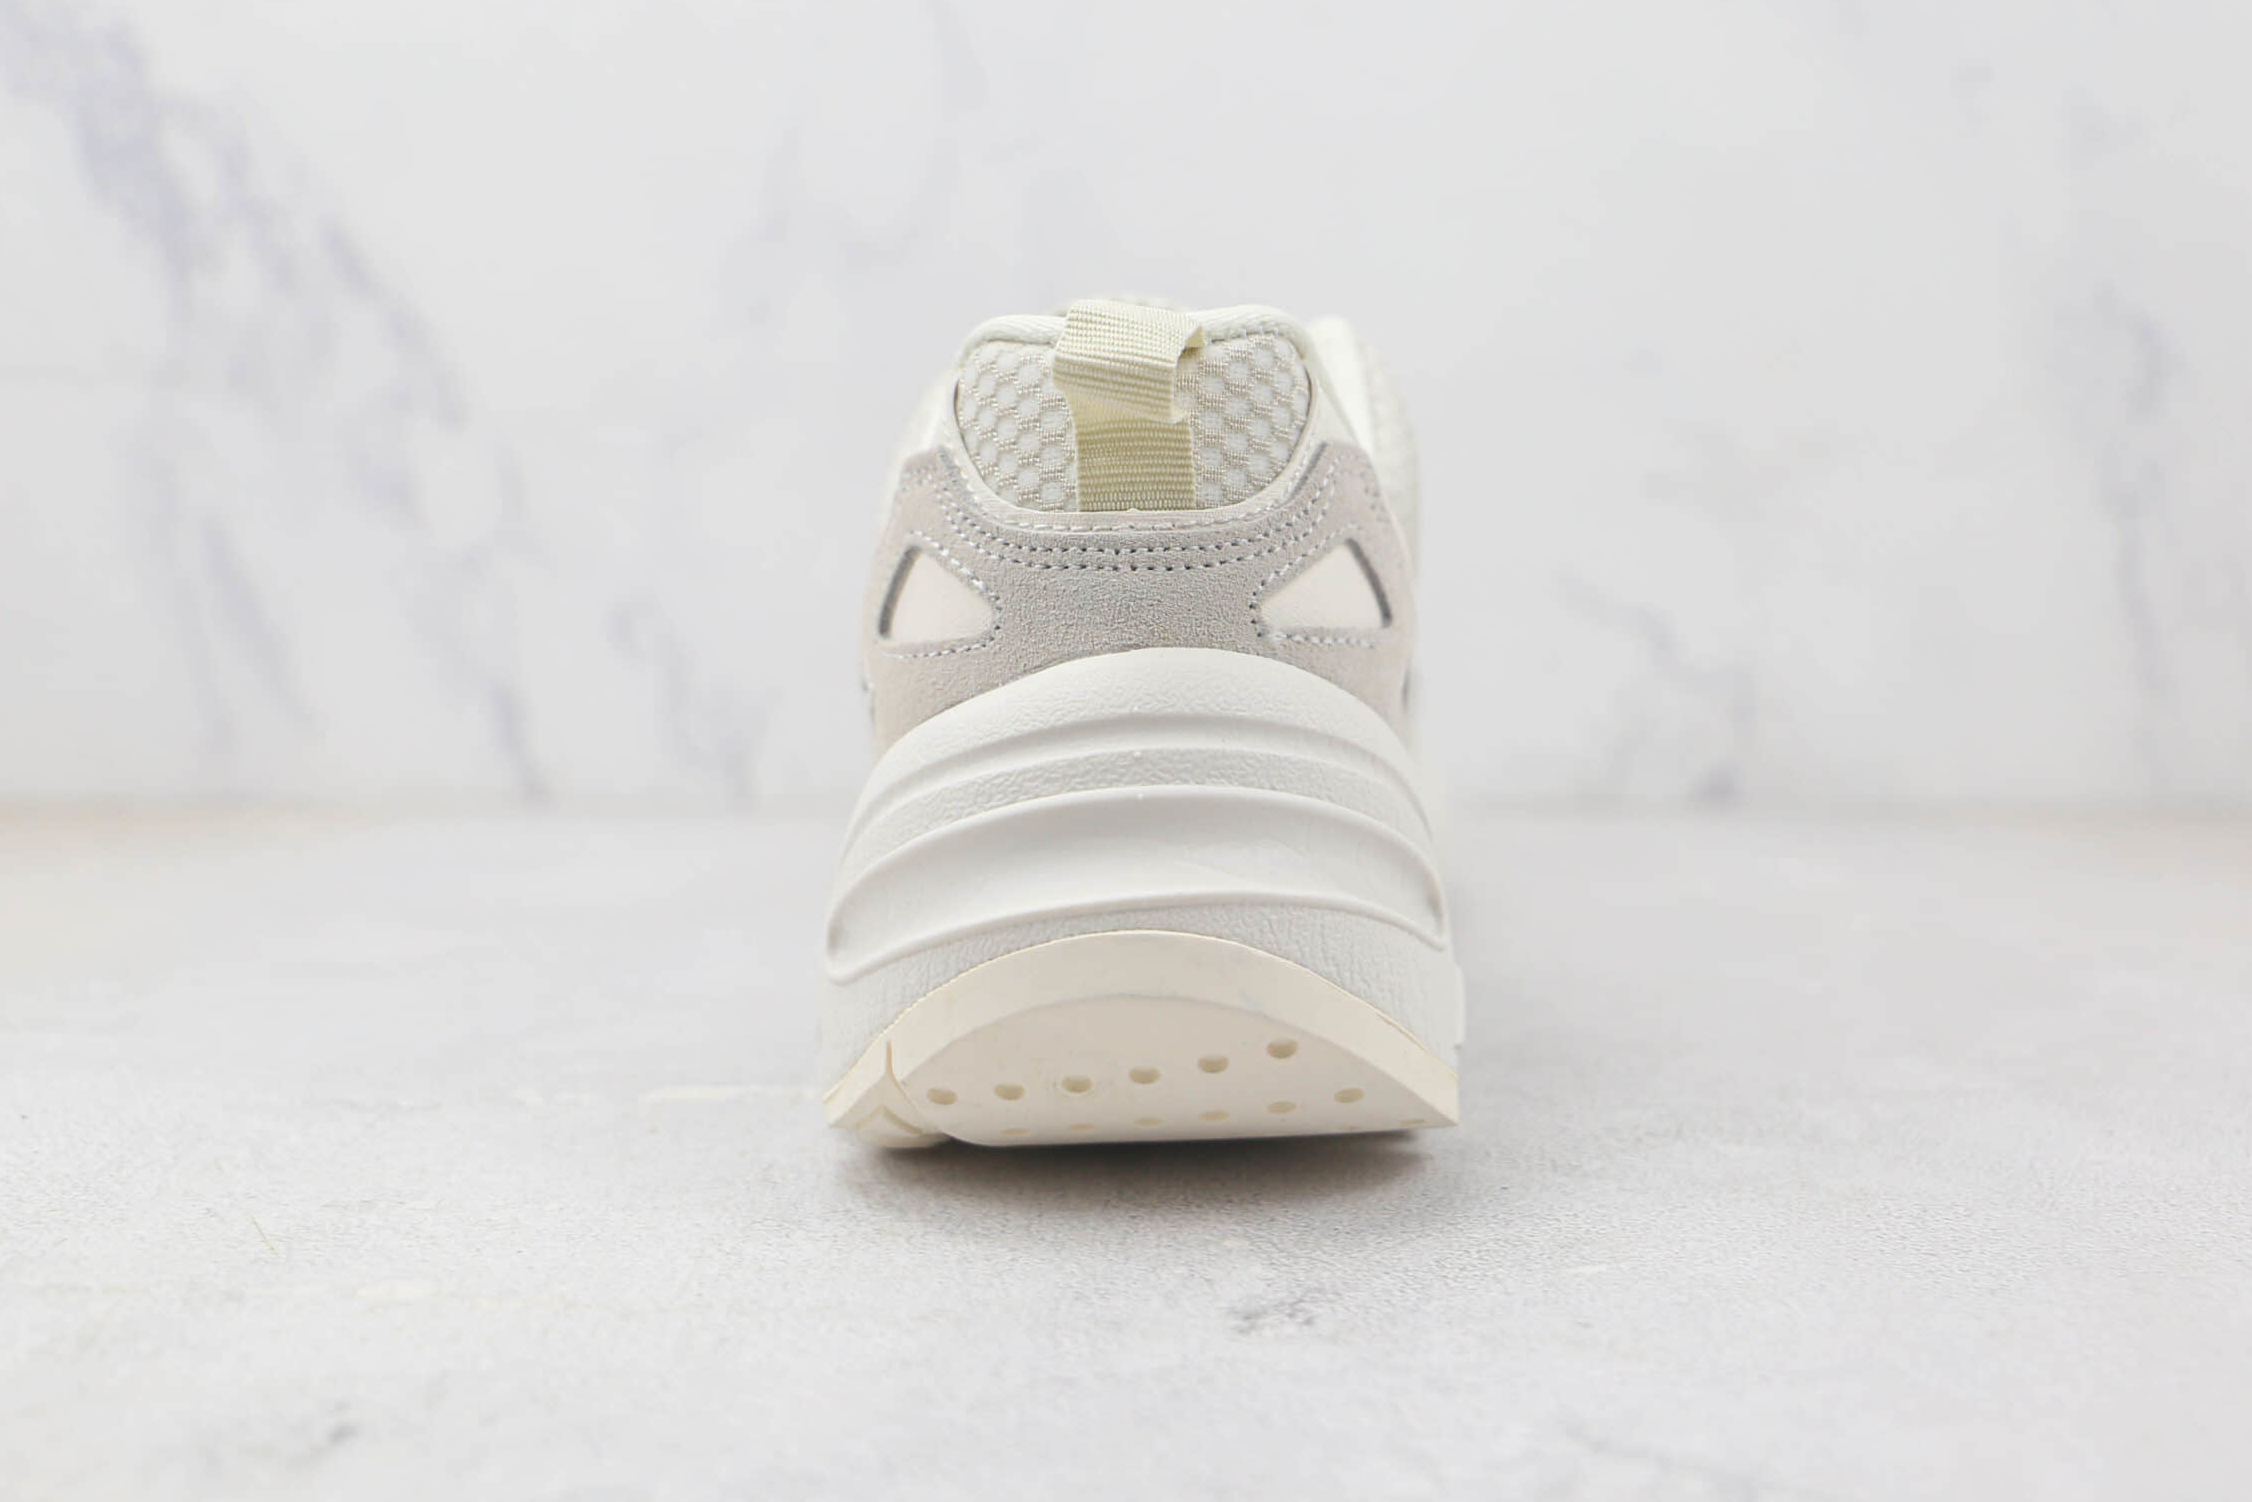 Adidas ZX 22 Boost 'Cream White Bliss' GY6697 - Stylish Comfort for Men